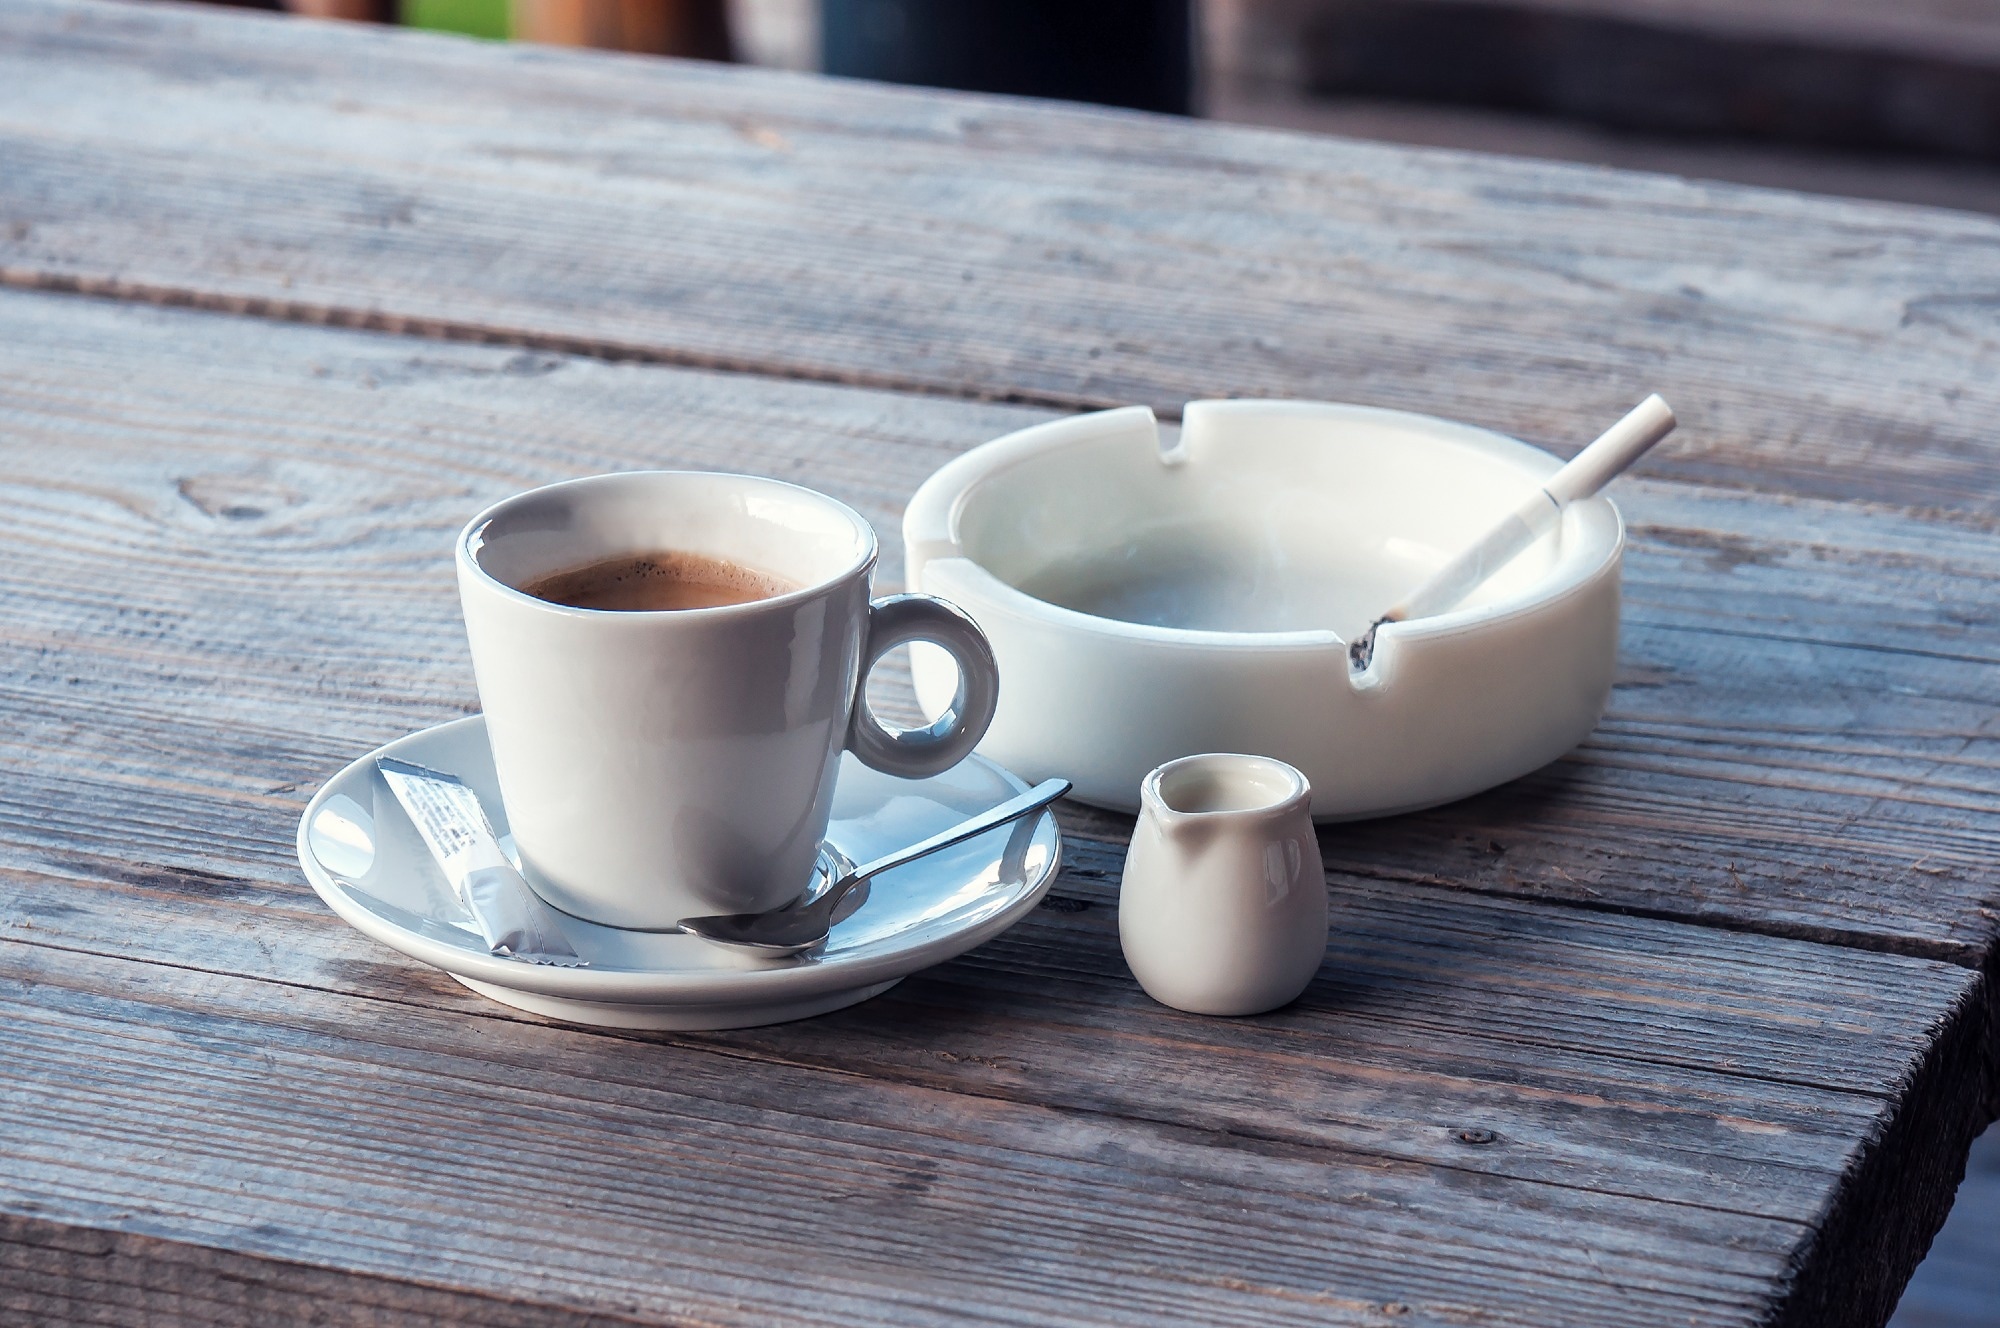 Study: Possible role of caffeine in nicotine use onset among early adolescents: Evidence from the Young Mountaineer Health Study Cohort. Image Credit: VovaShevchuk/Shutterstock.com